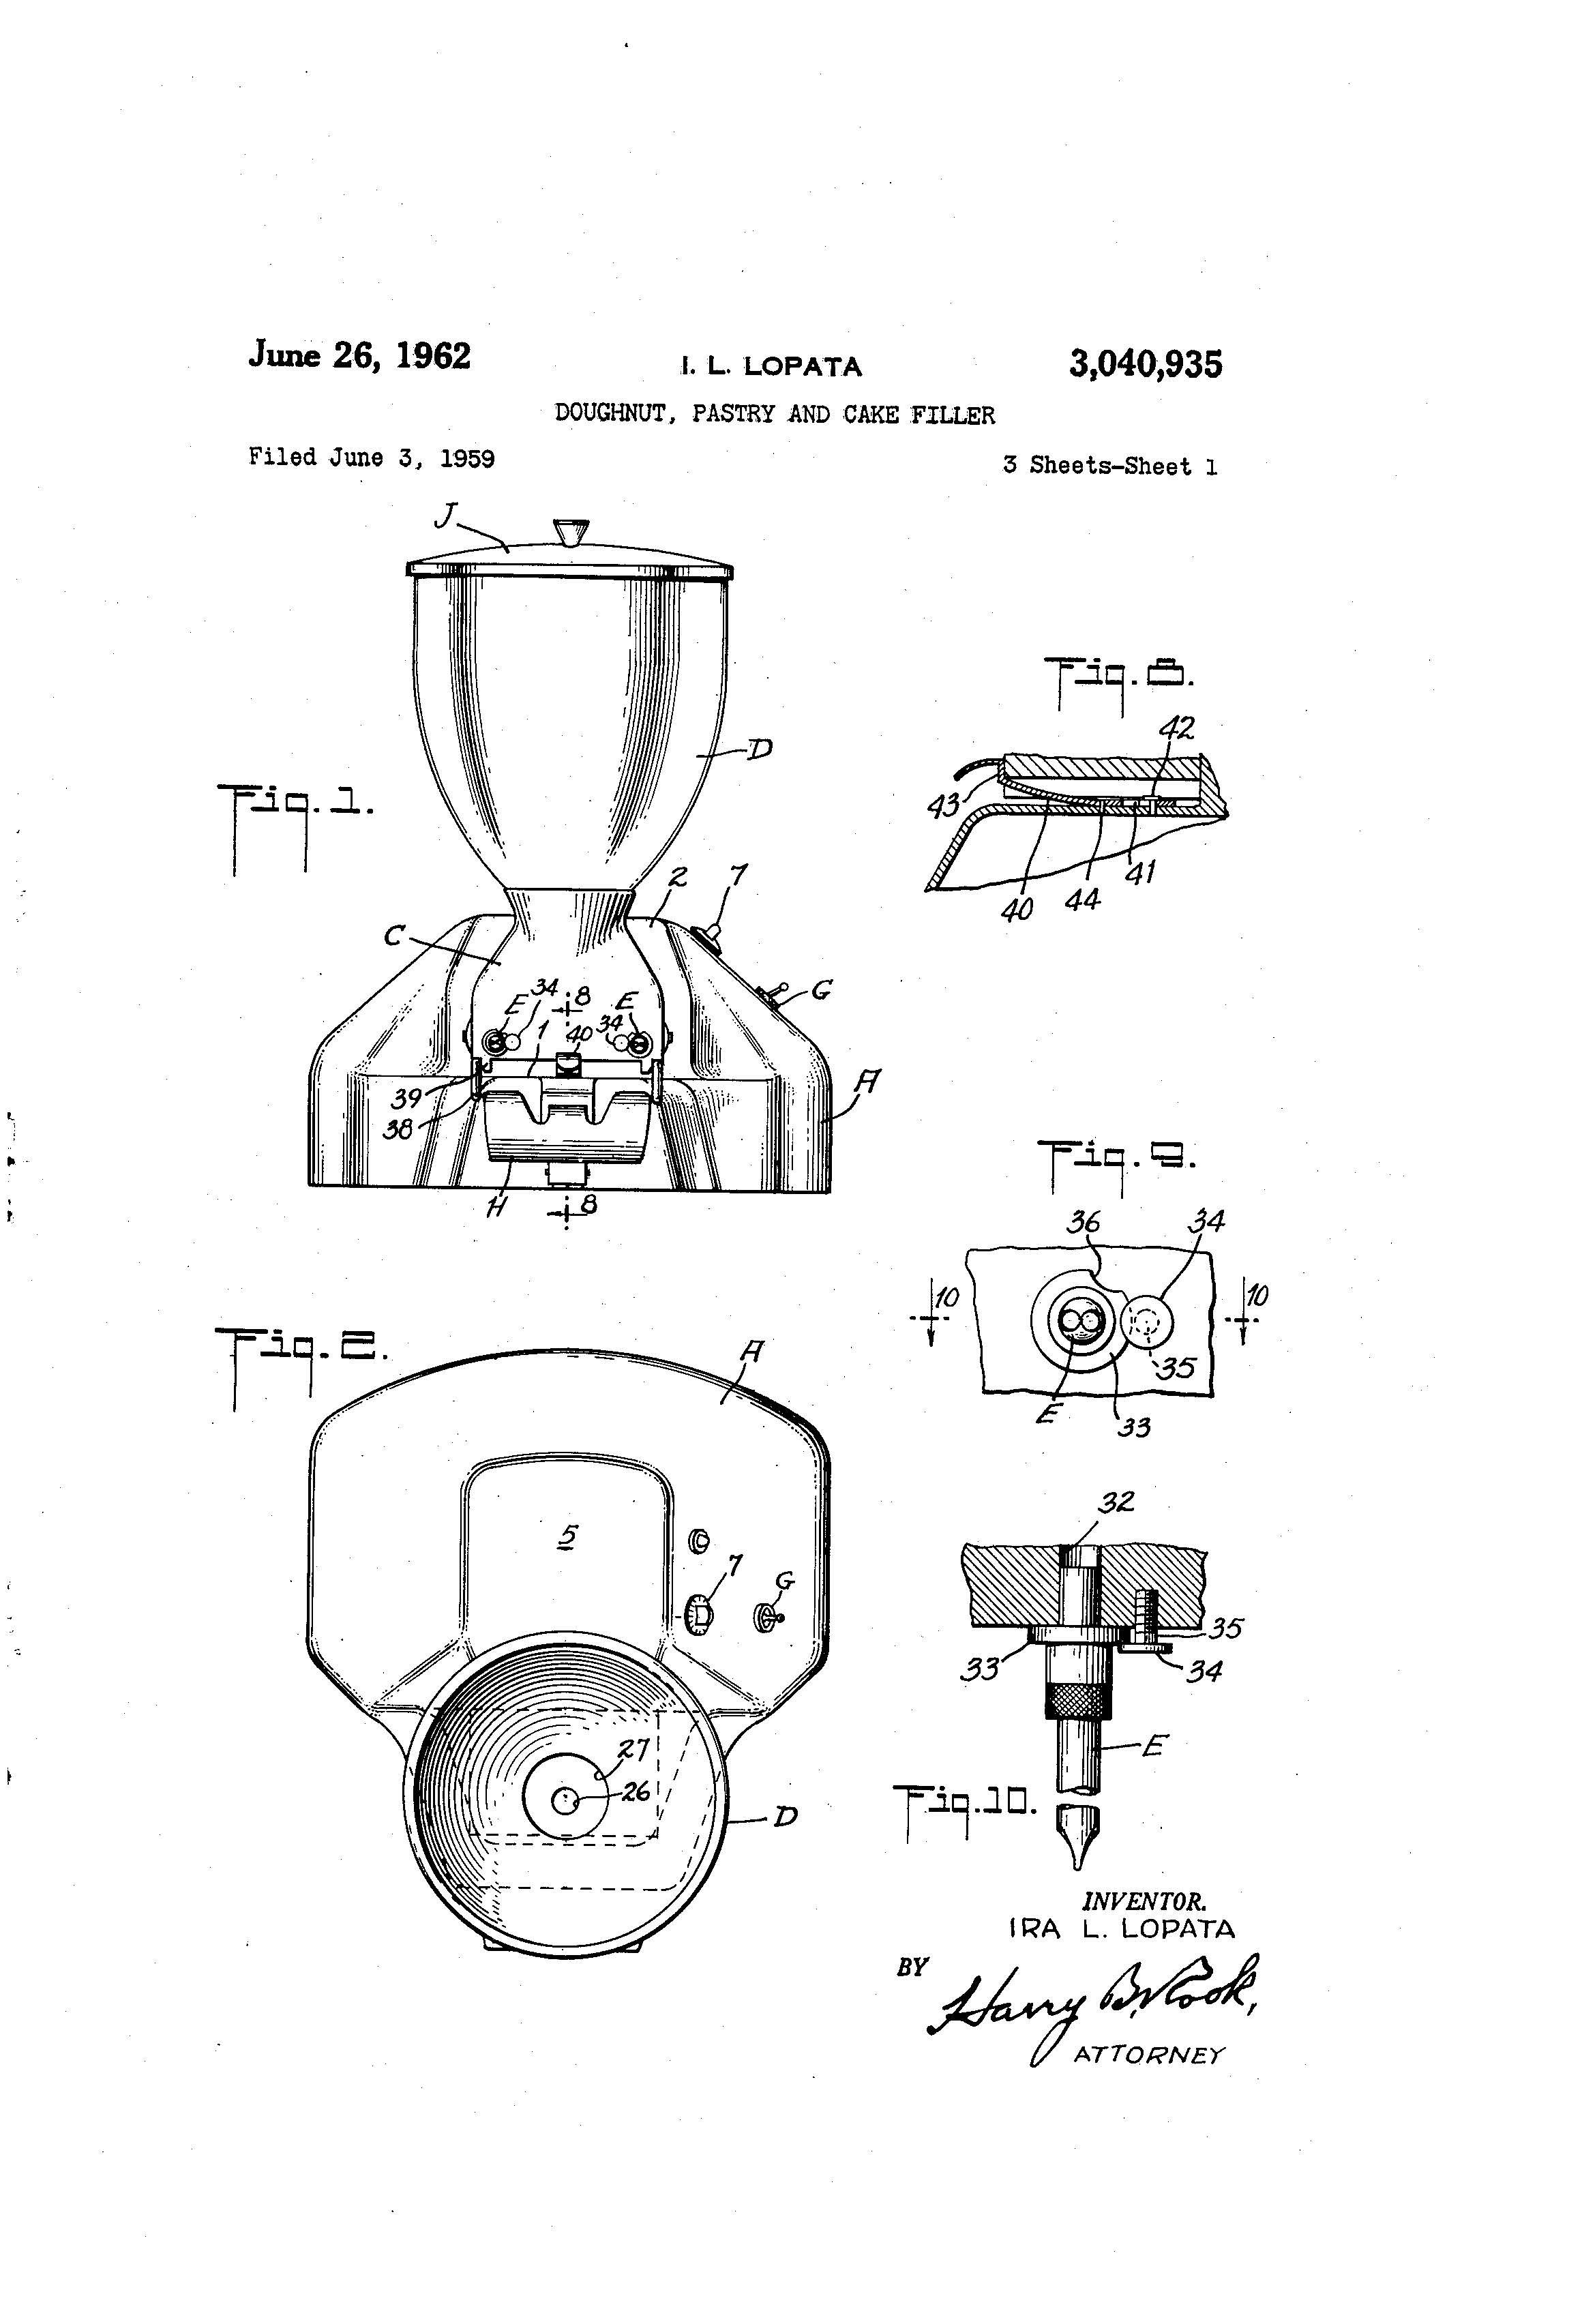 patent for doughnut pastry and cake filler